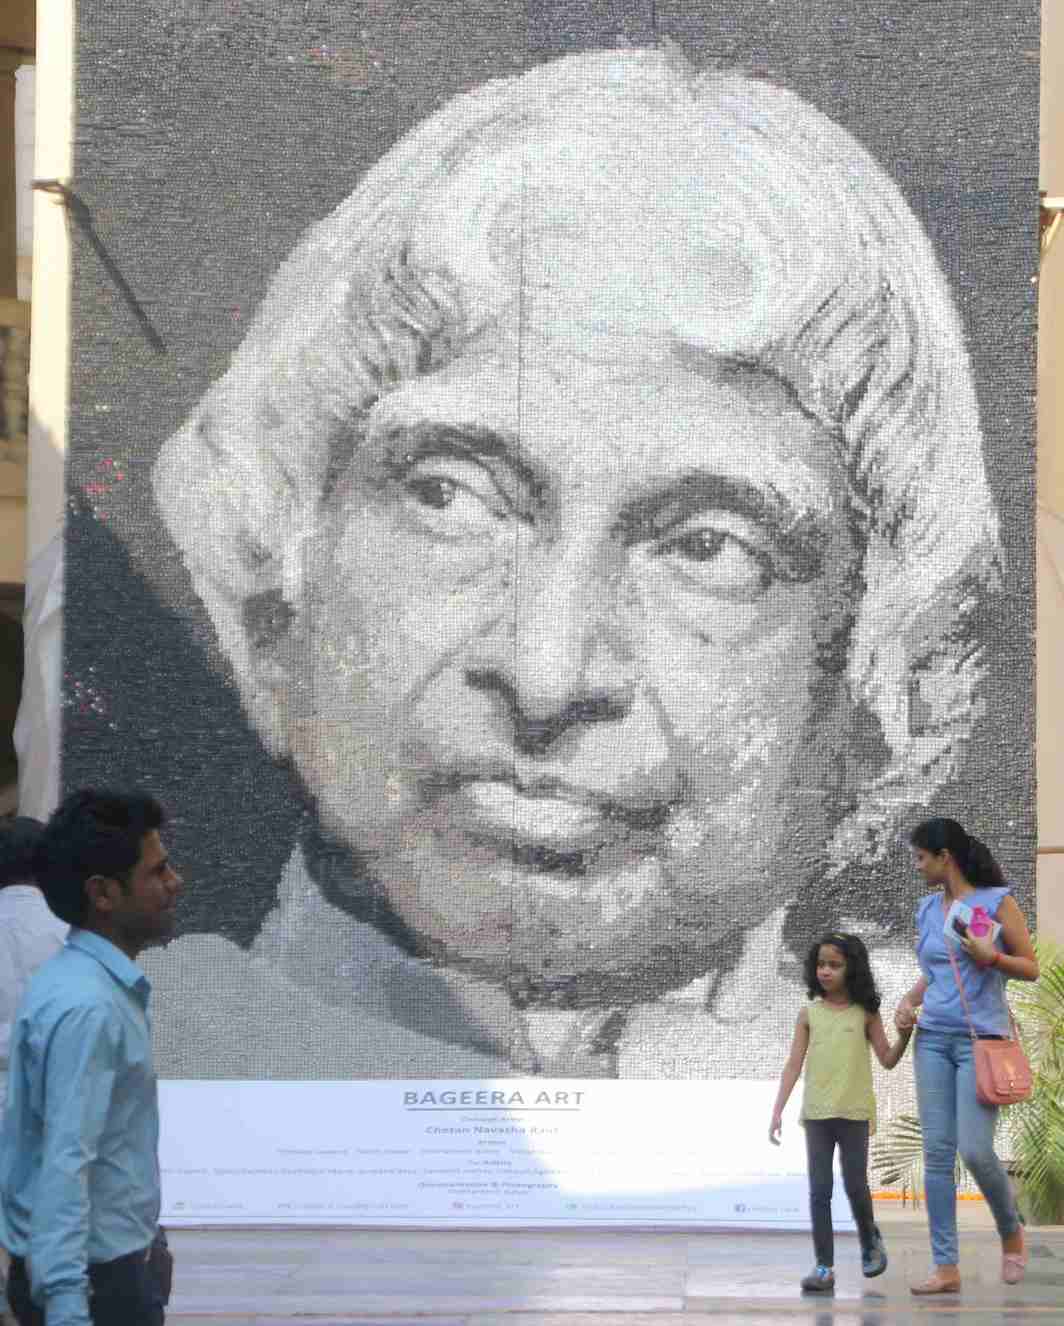 GIANT AMONG CITIZENS: The world’s largest keyboard button portrait depicts the 11th President of India, Dr APJ Abdul Kalam created by artist Chetan Raut at a shopping mall, Powai, in Mumbai, UNI